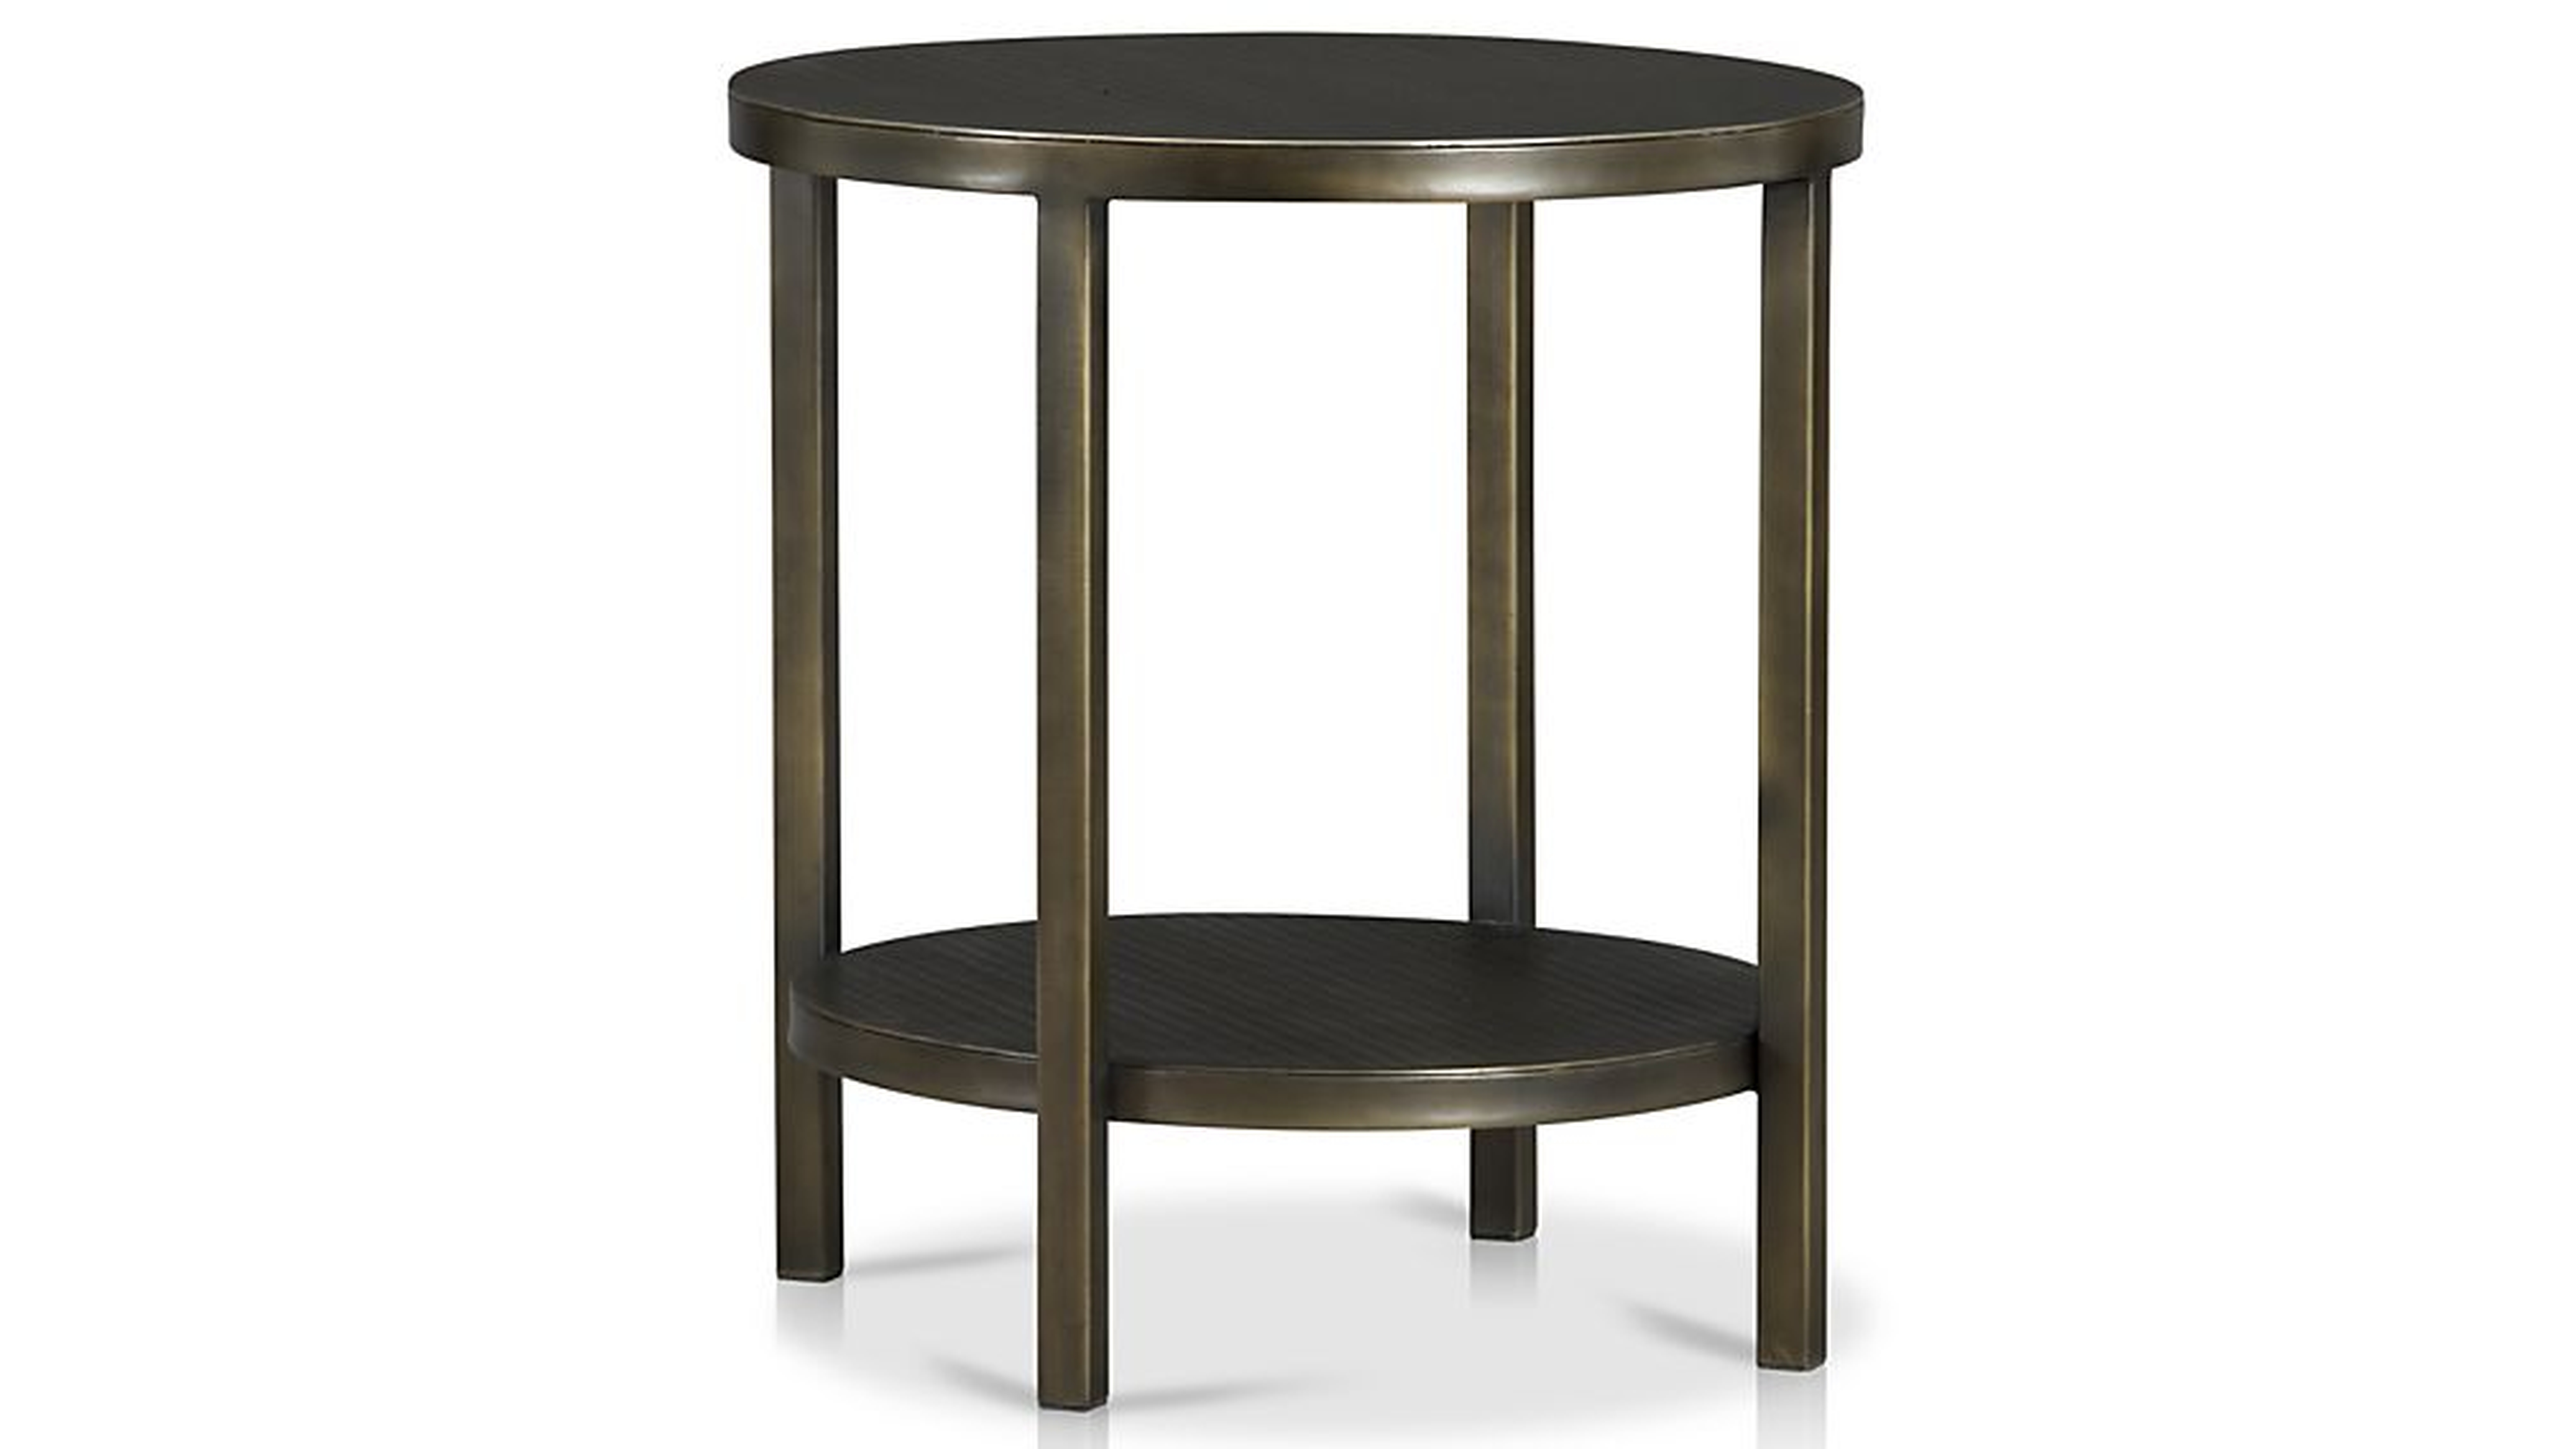 Echelon Round Side Table - Crate and Barrel